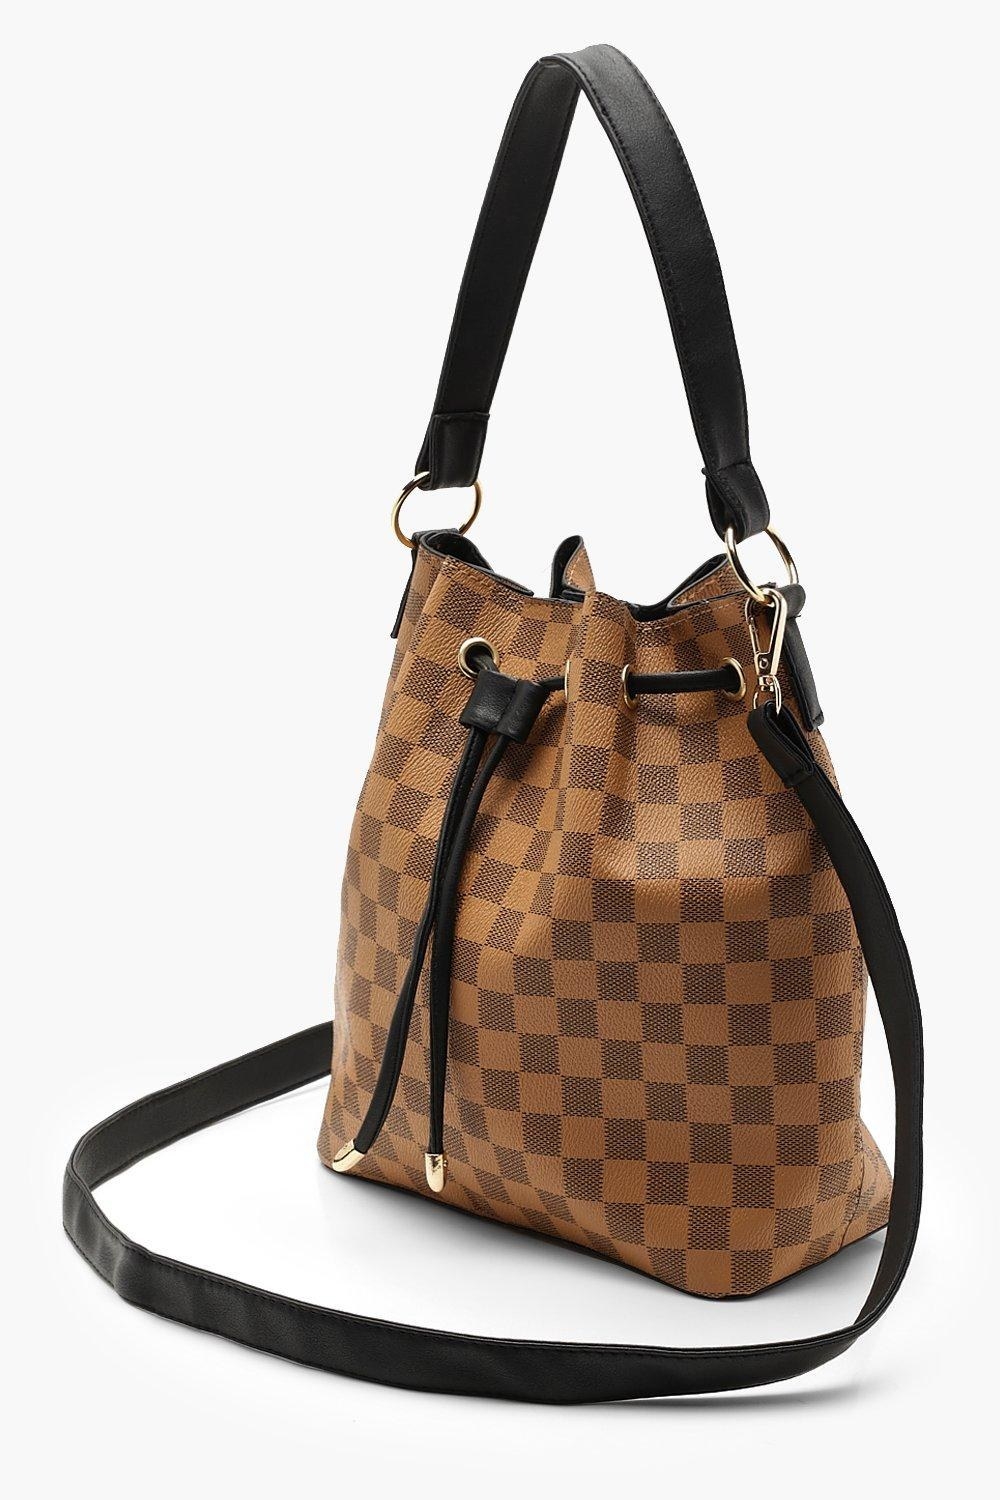 The brown checkered bag with black straps and gold hardware